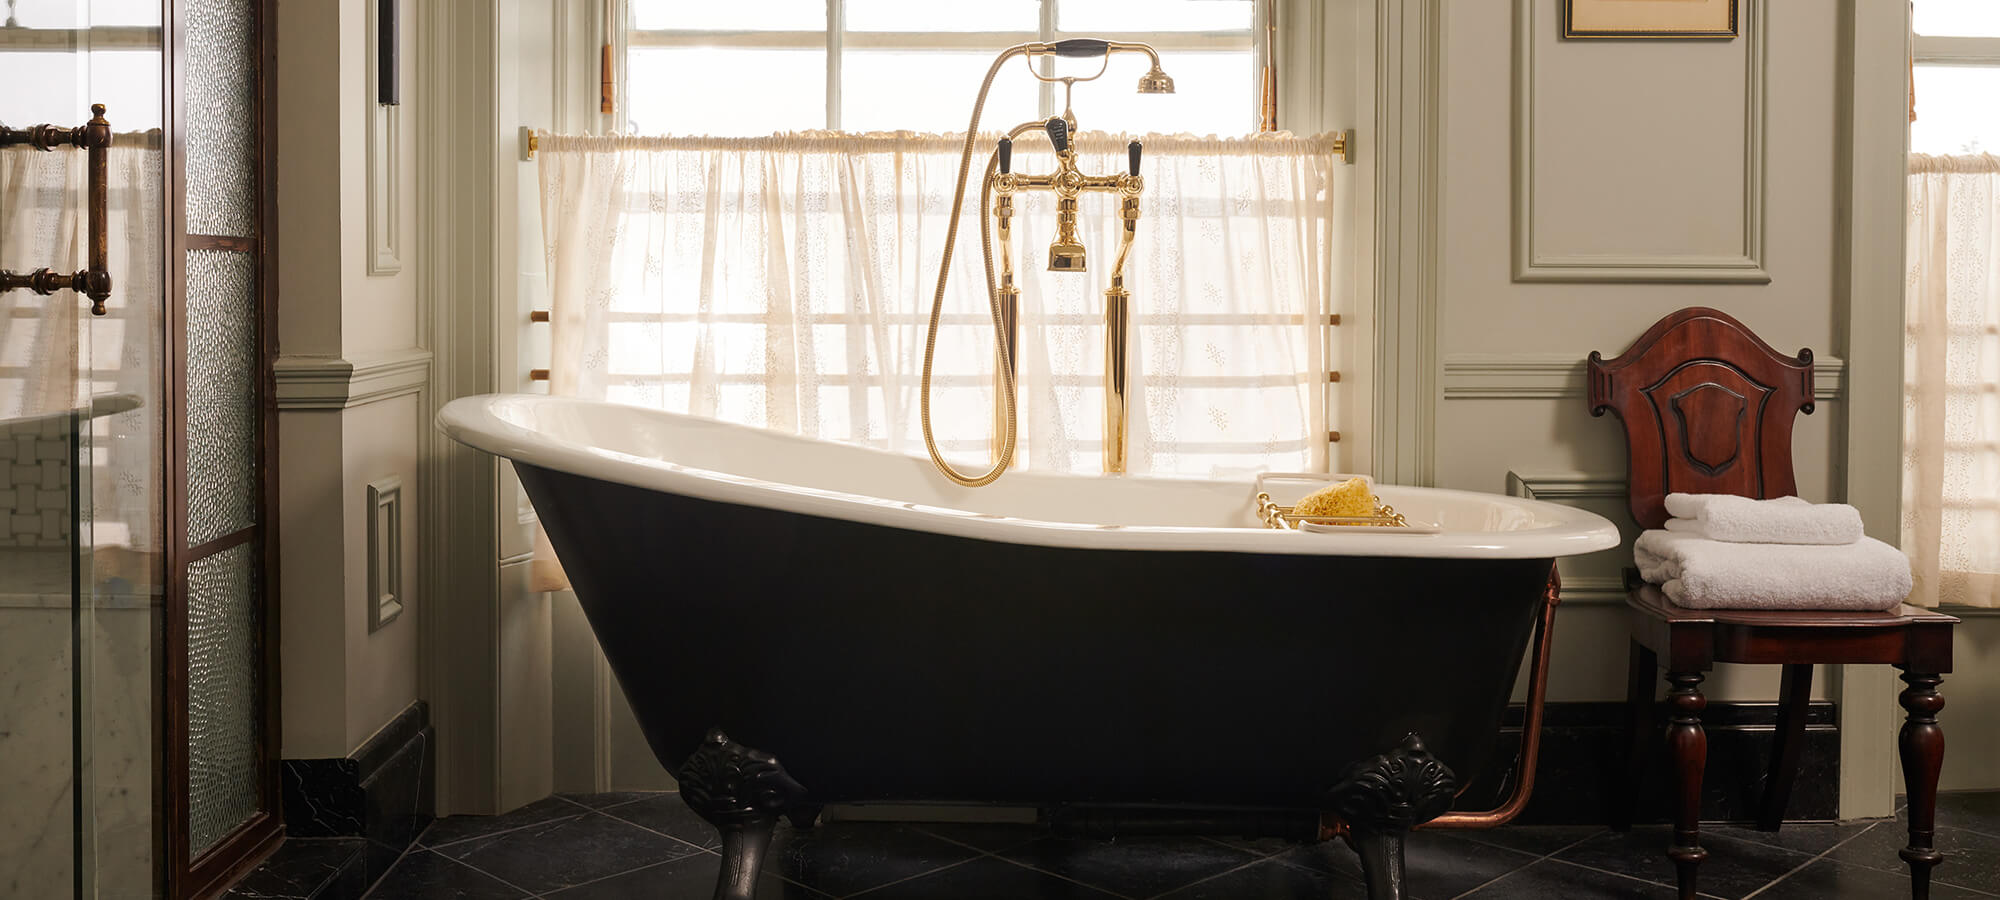 A large green roll top bath with gold taps and shower in the Royal Lochnagar Suite